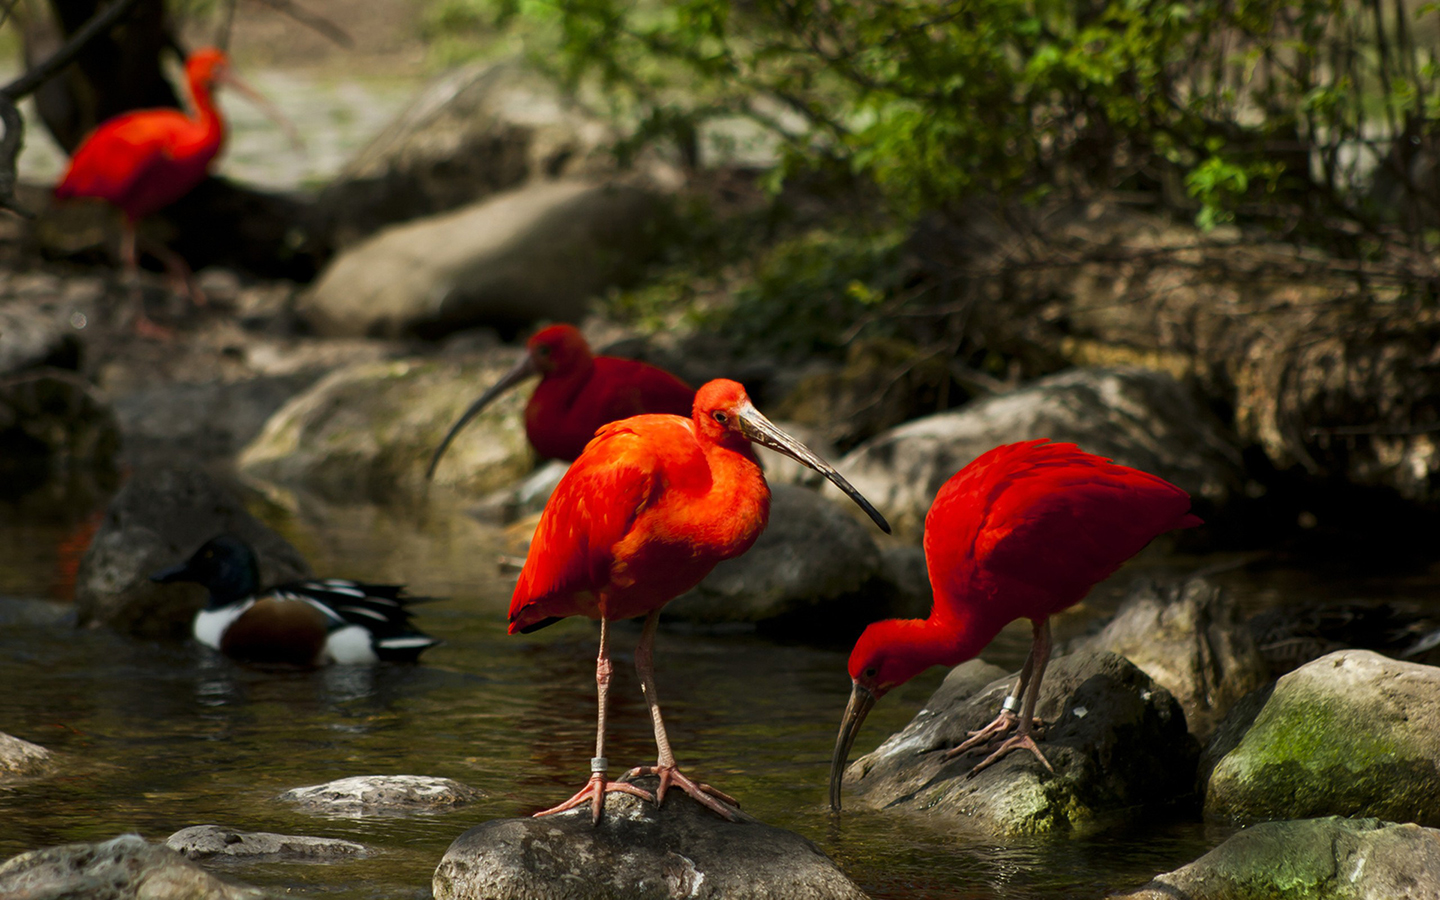 Scarlet Ibis Picture